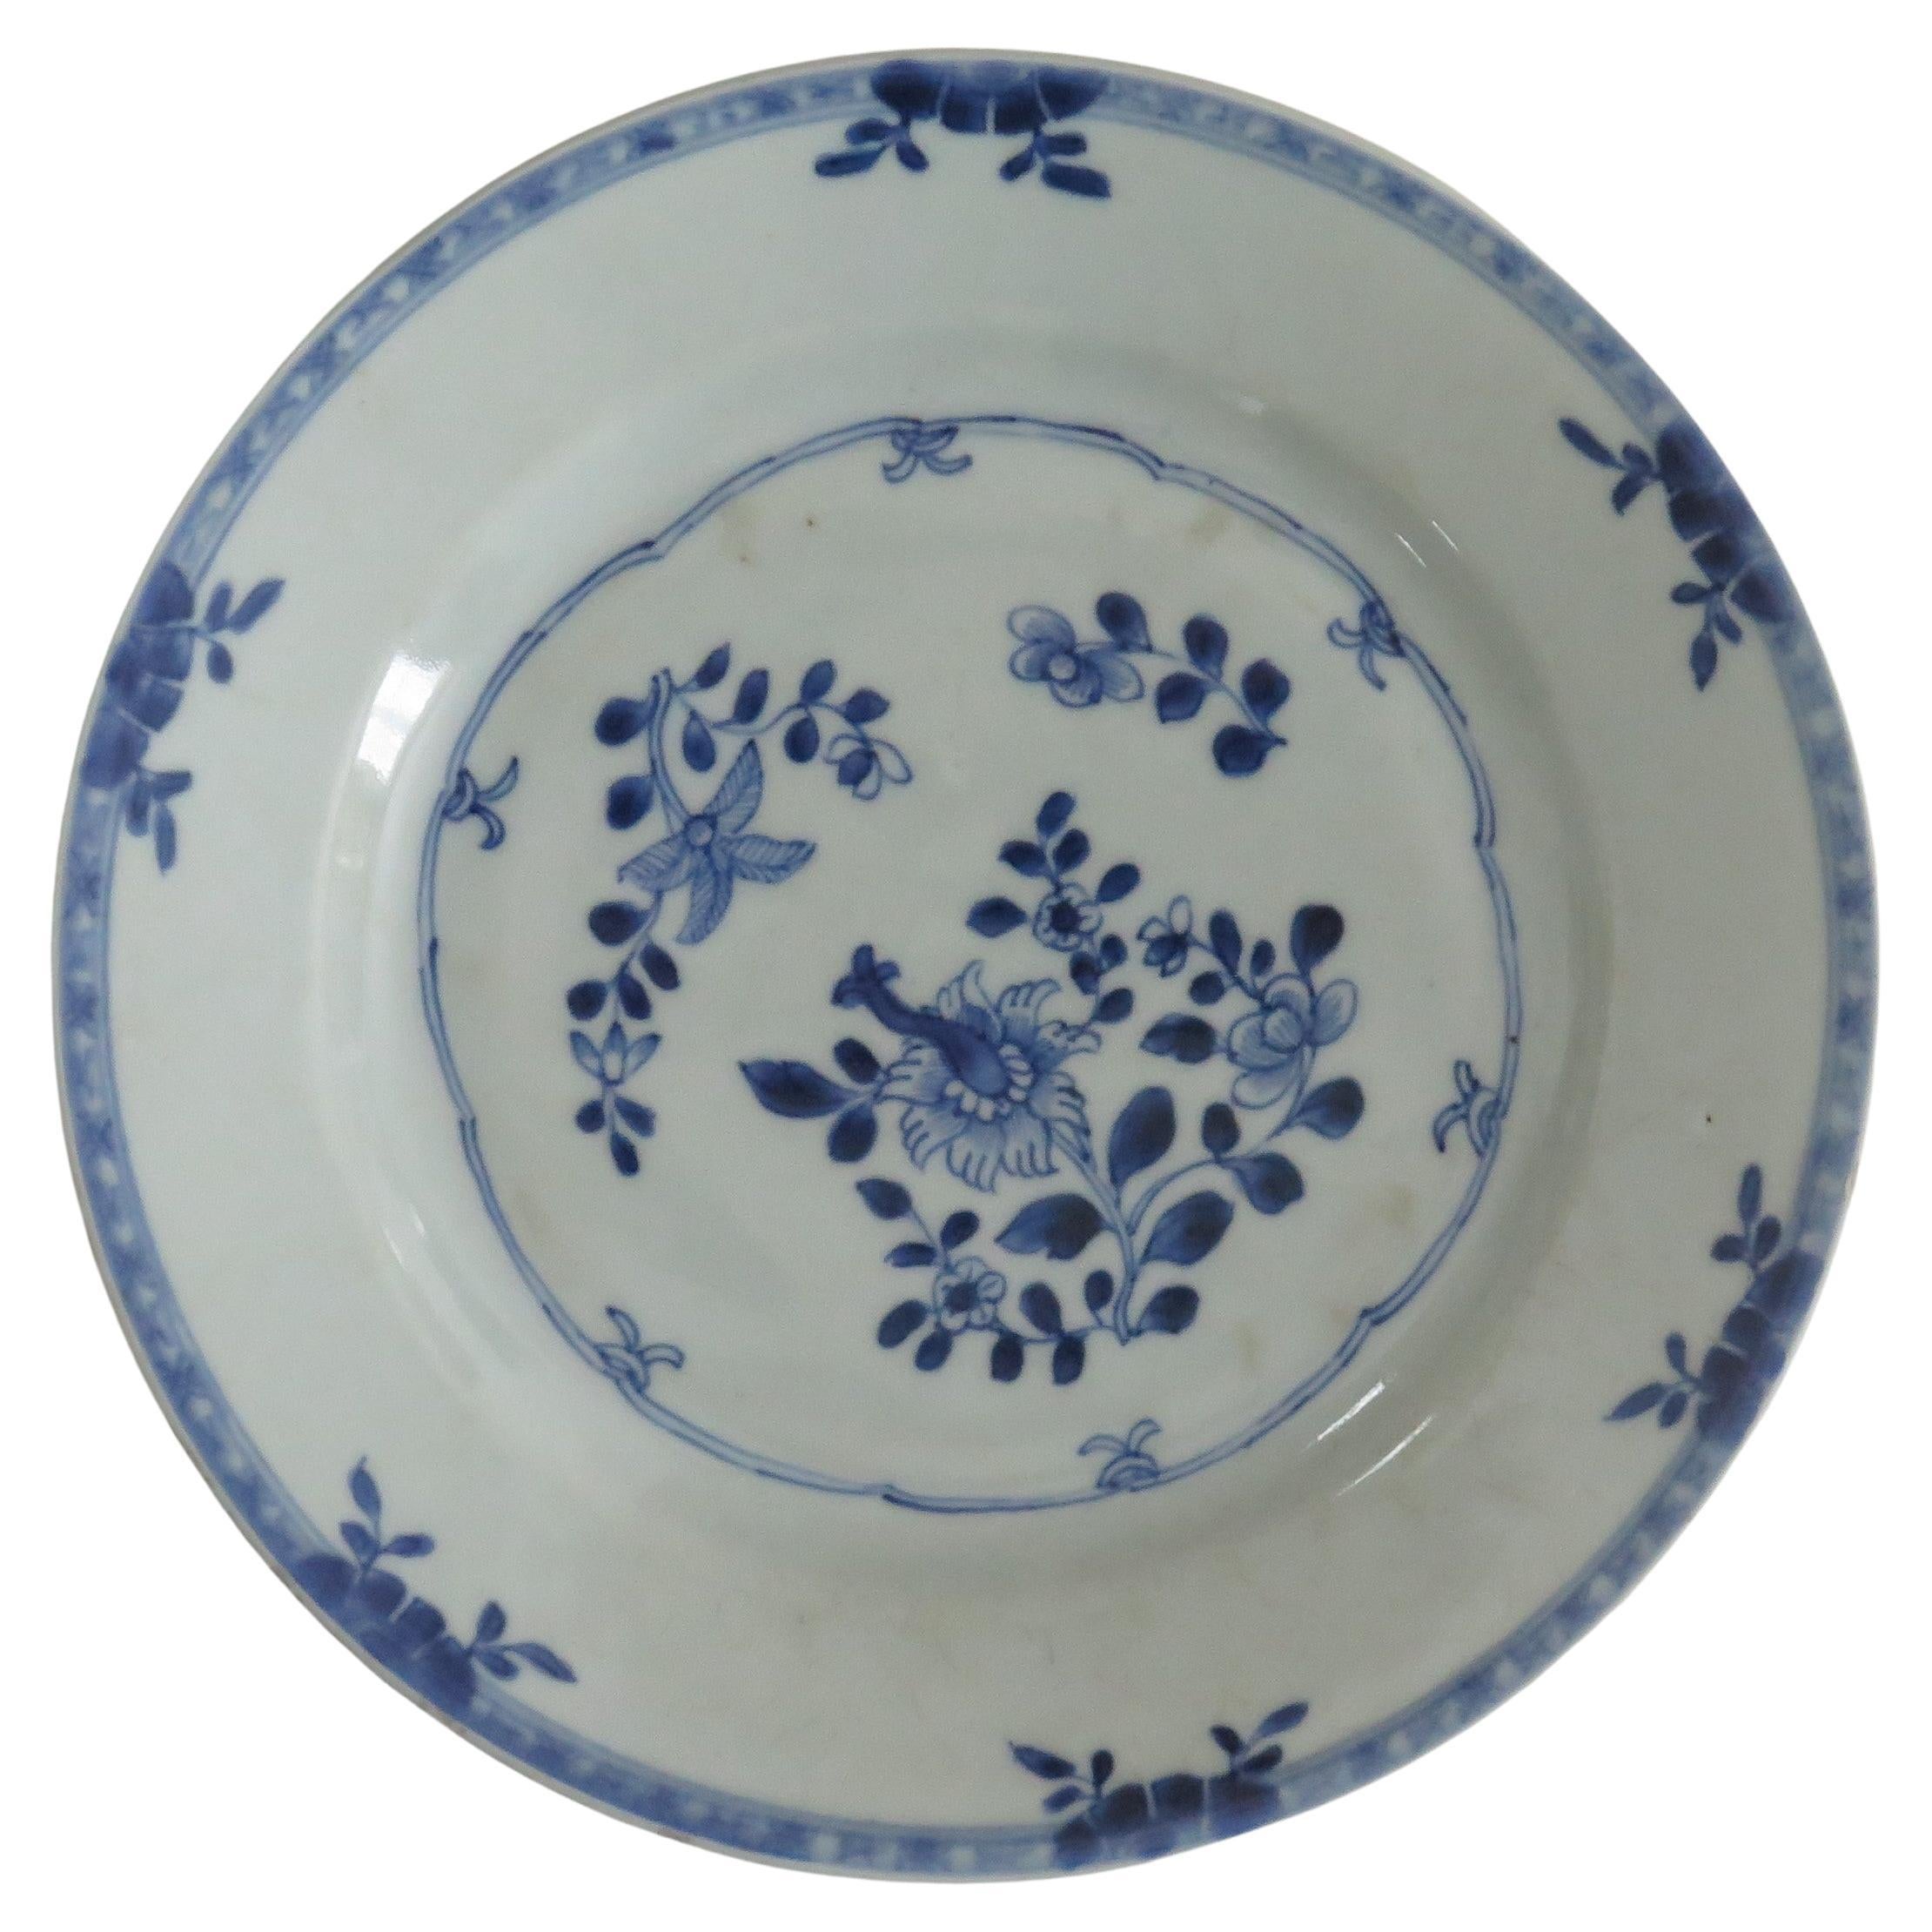 Chinese Export Porcelain Plate Blue & White Hand Painted, Qing, circa 1770